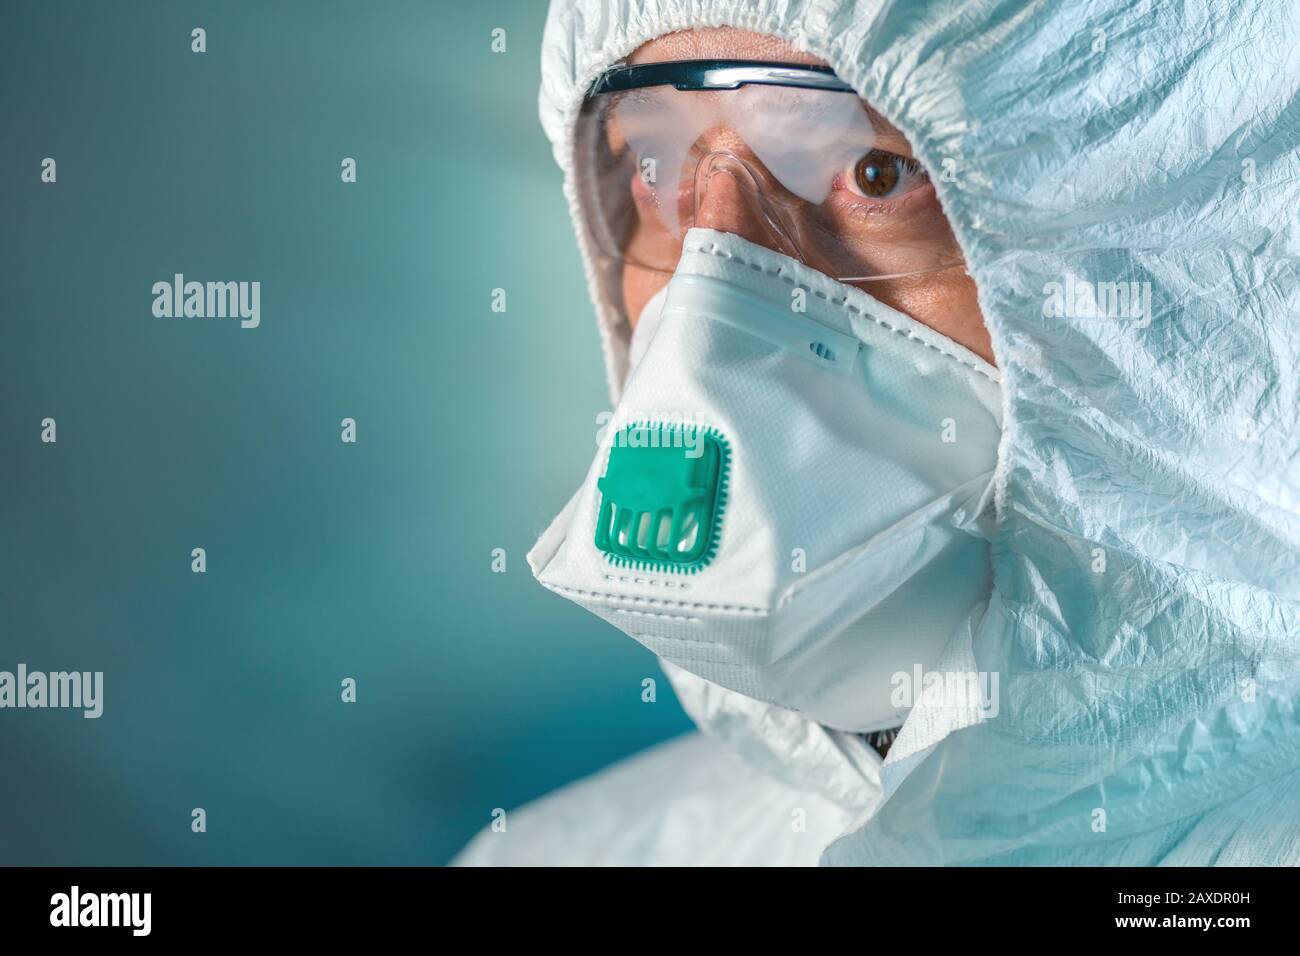 Tired epidemiologist in wuhan-coronavirus quarantine, conceptual image of medical specialist wearing protective clothing and mask. Stock Photo